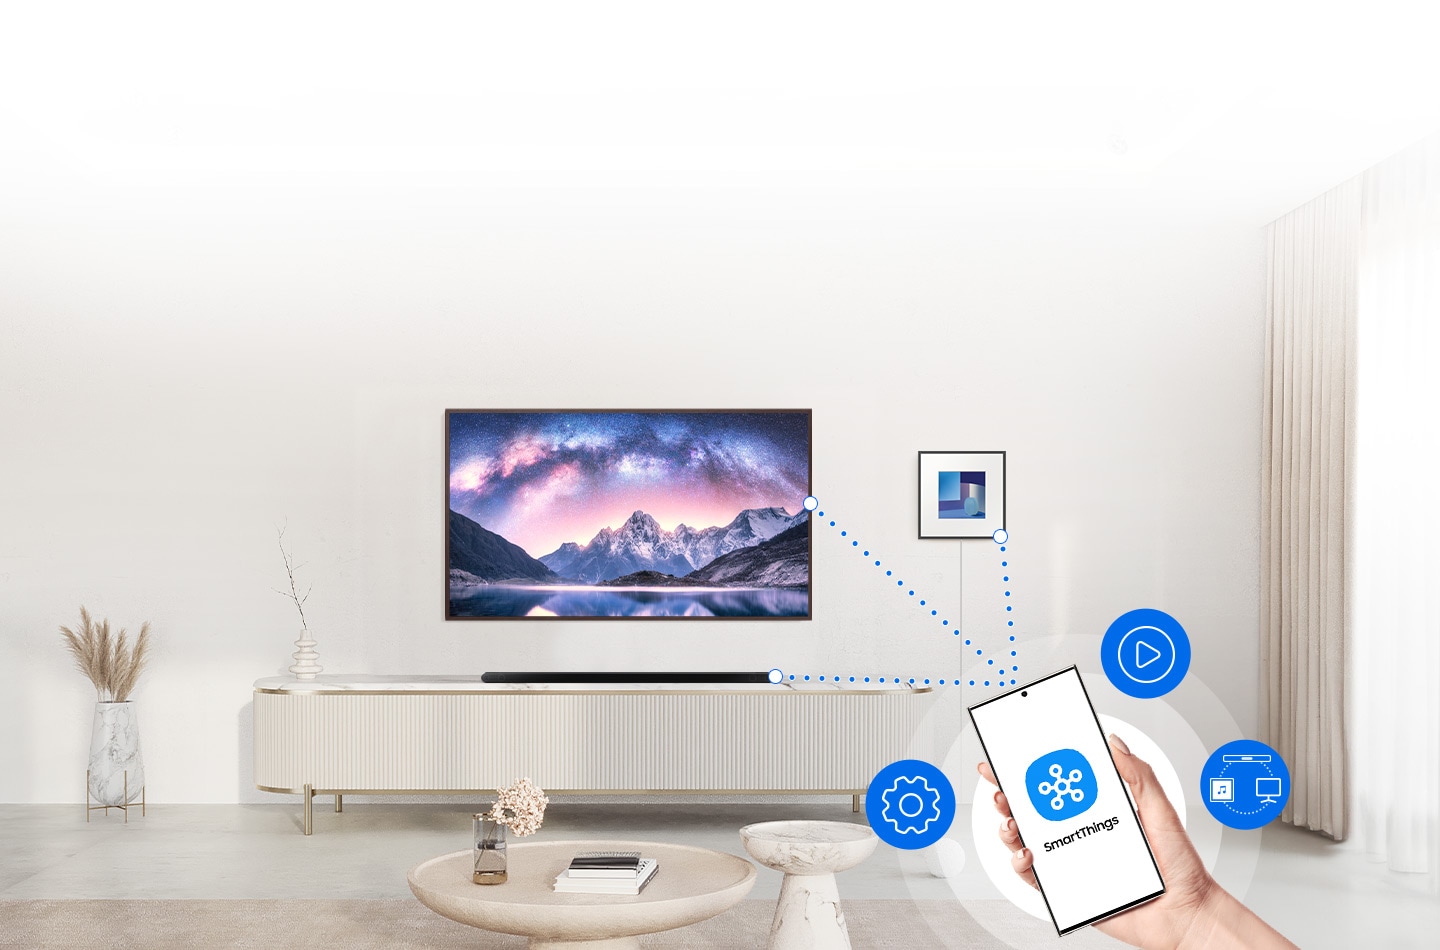 A phone has a SmartThings logo on screen. UI icons hover nearby. Dotted lines connect the phone to a TV and sound devices.